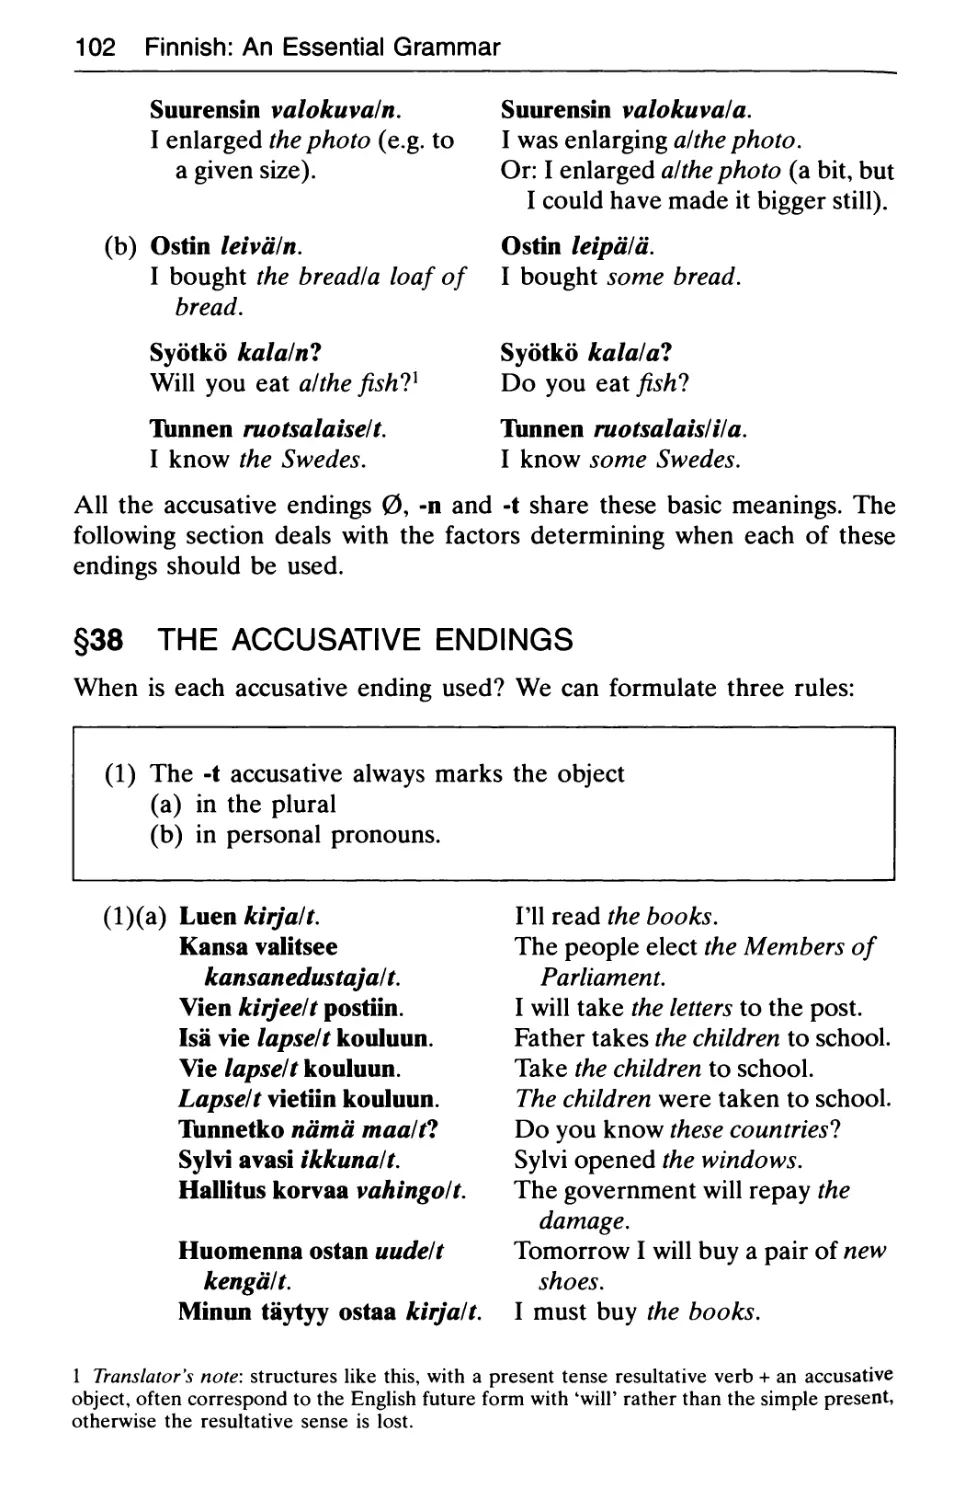 §38 The accusative endings